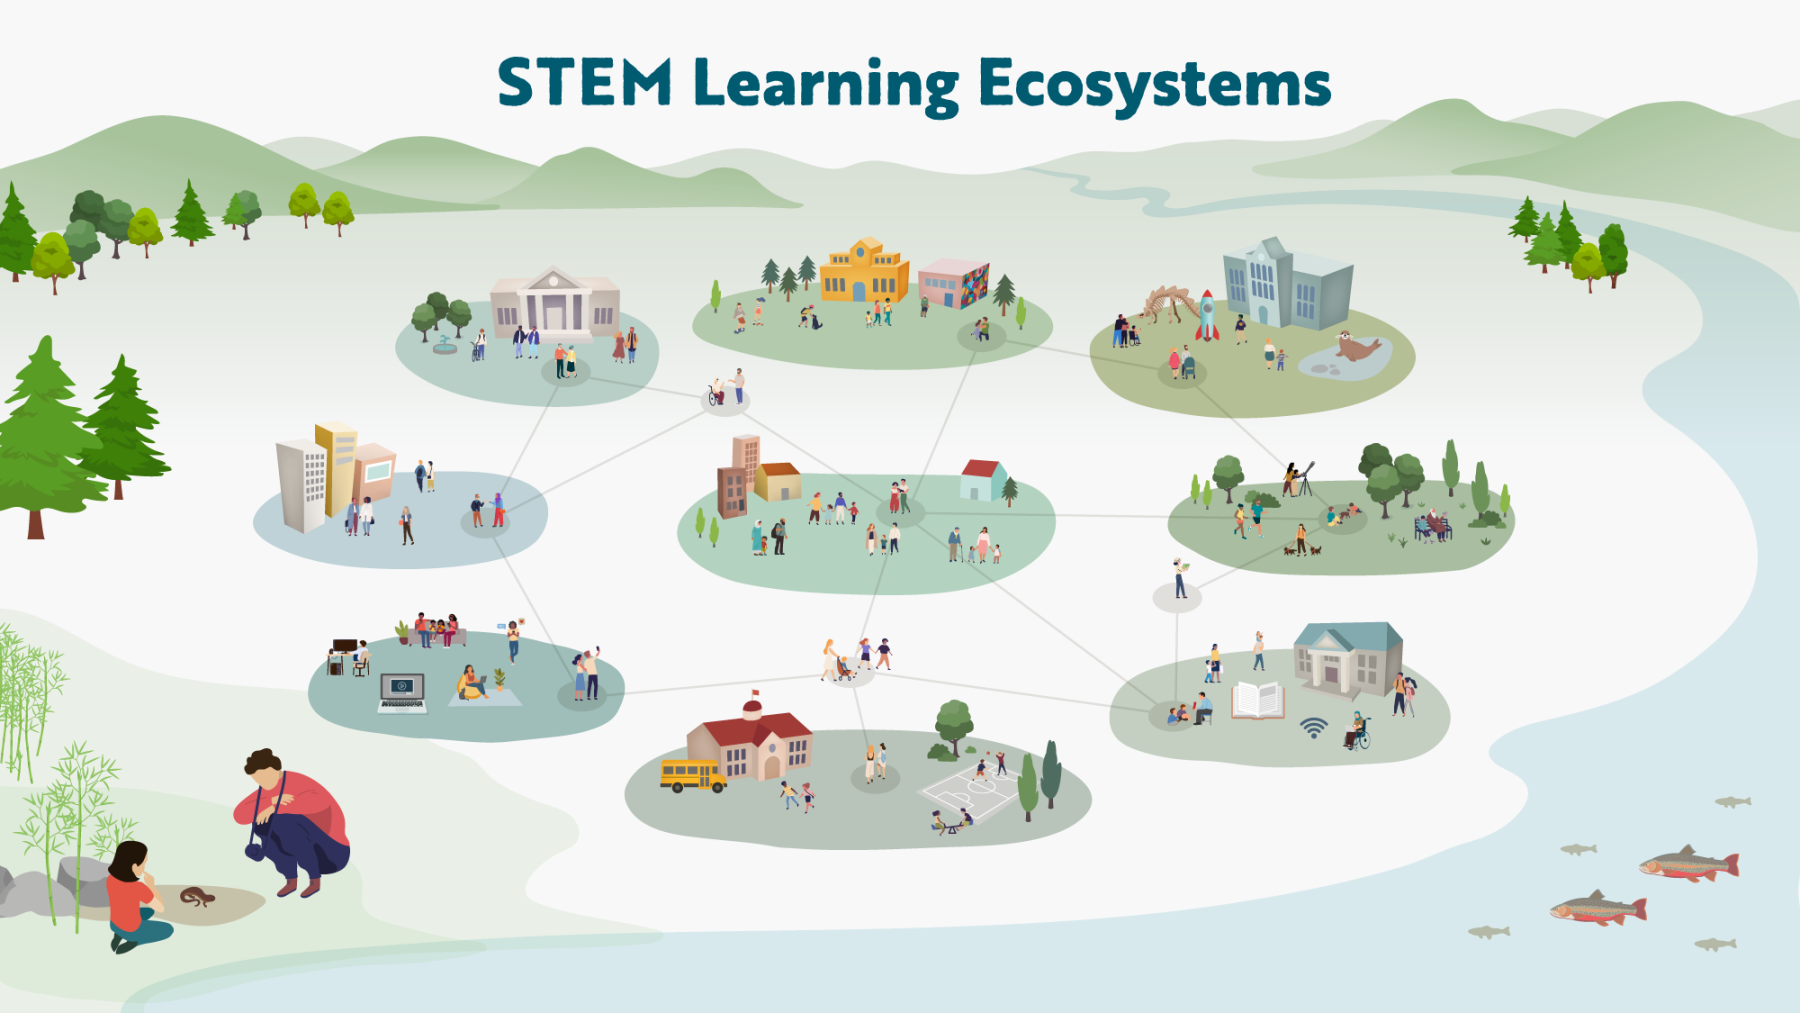 STEM Learning Ecosystem generalized example in context without text labels